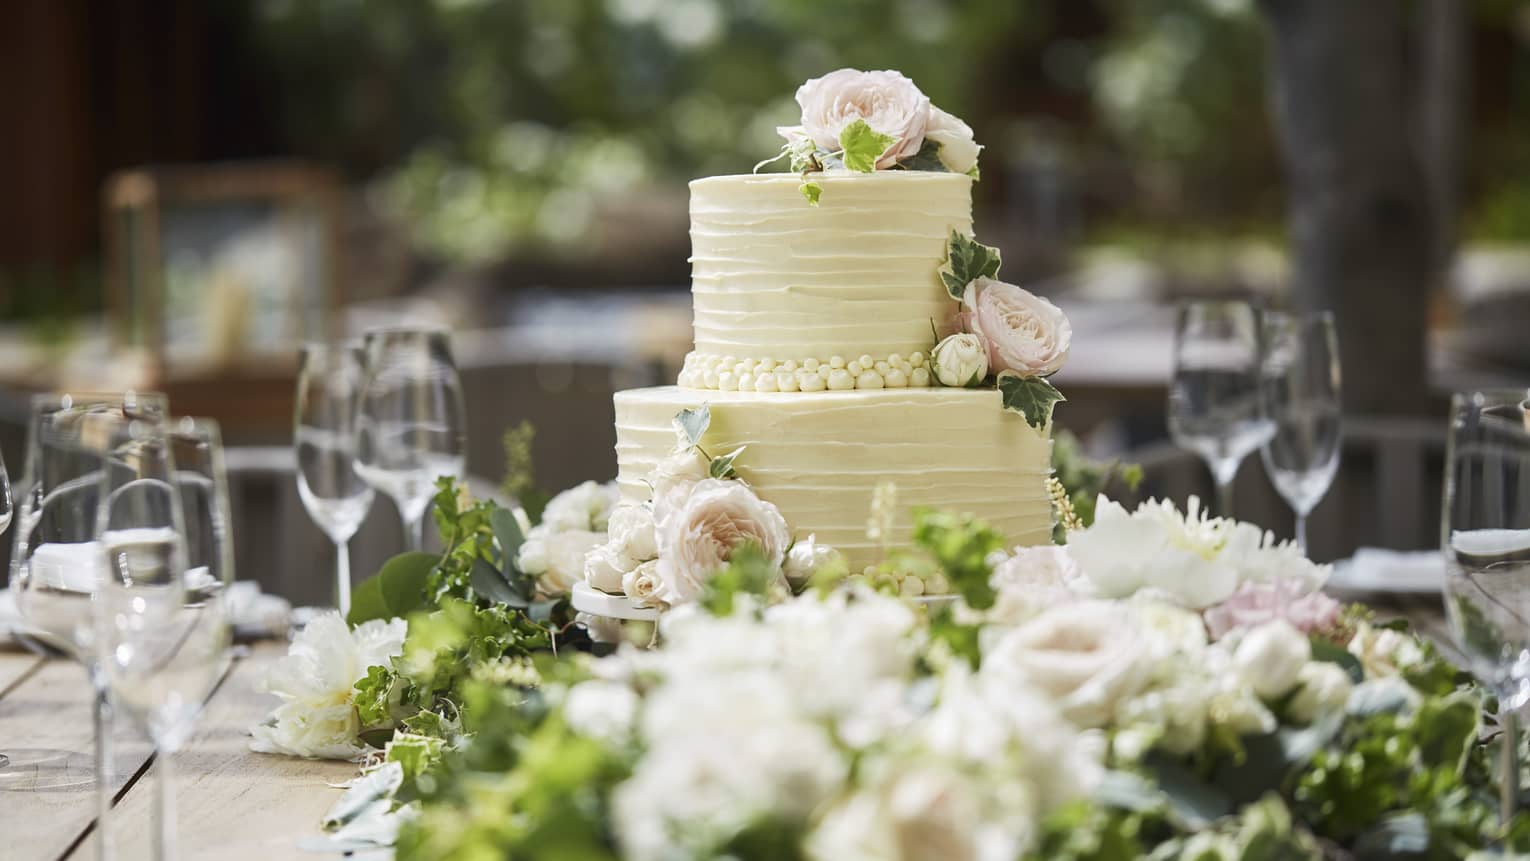 Two-tiered white wedding cake on banquet table with wine glasses, flowers